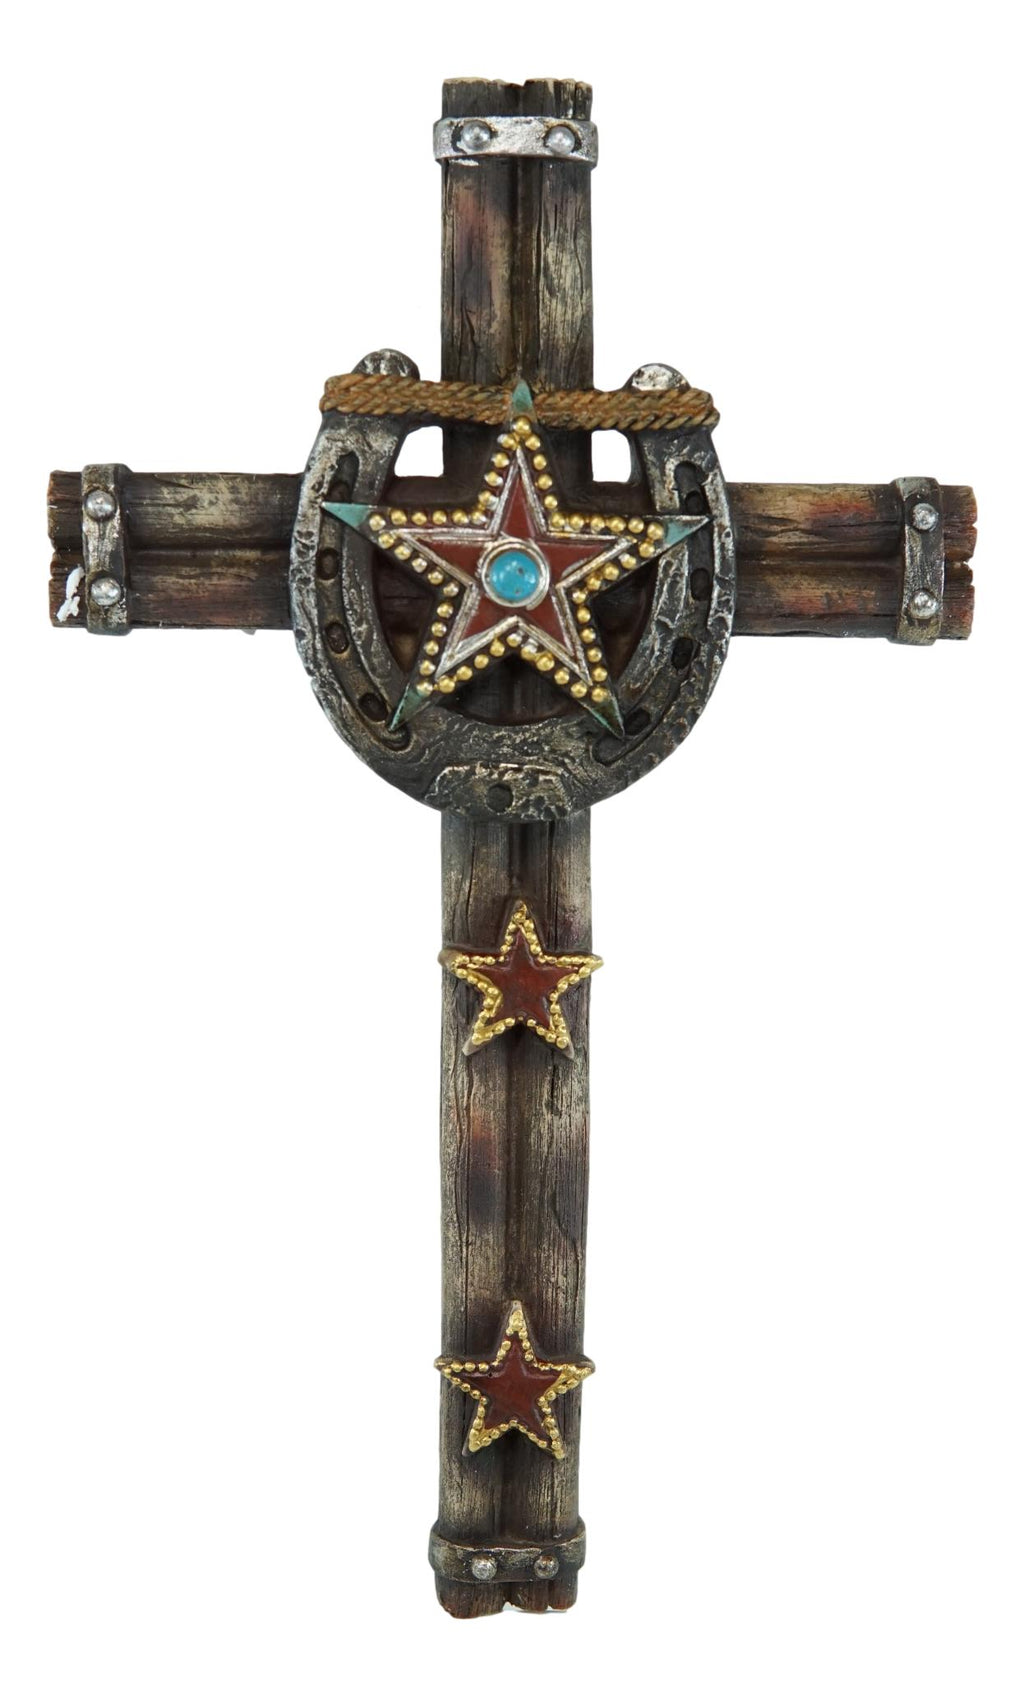 Urbalabs Western 12 Inch Wall Cross Horseshoe Star Teal Stone Bless  Distressed Rustic Cowboy Religious Wall Hanging Cross Country Wall Decor  Room Decoration Office Church Home 